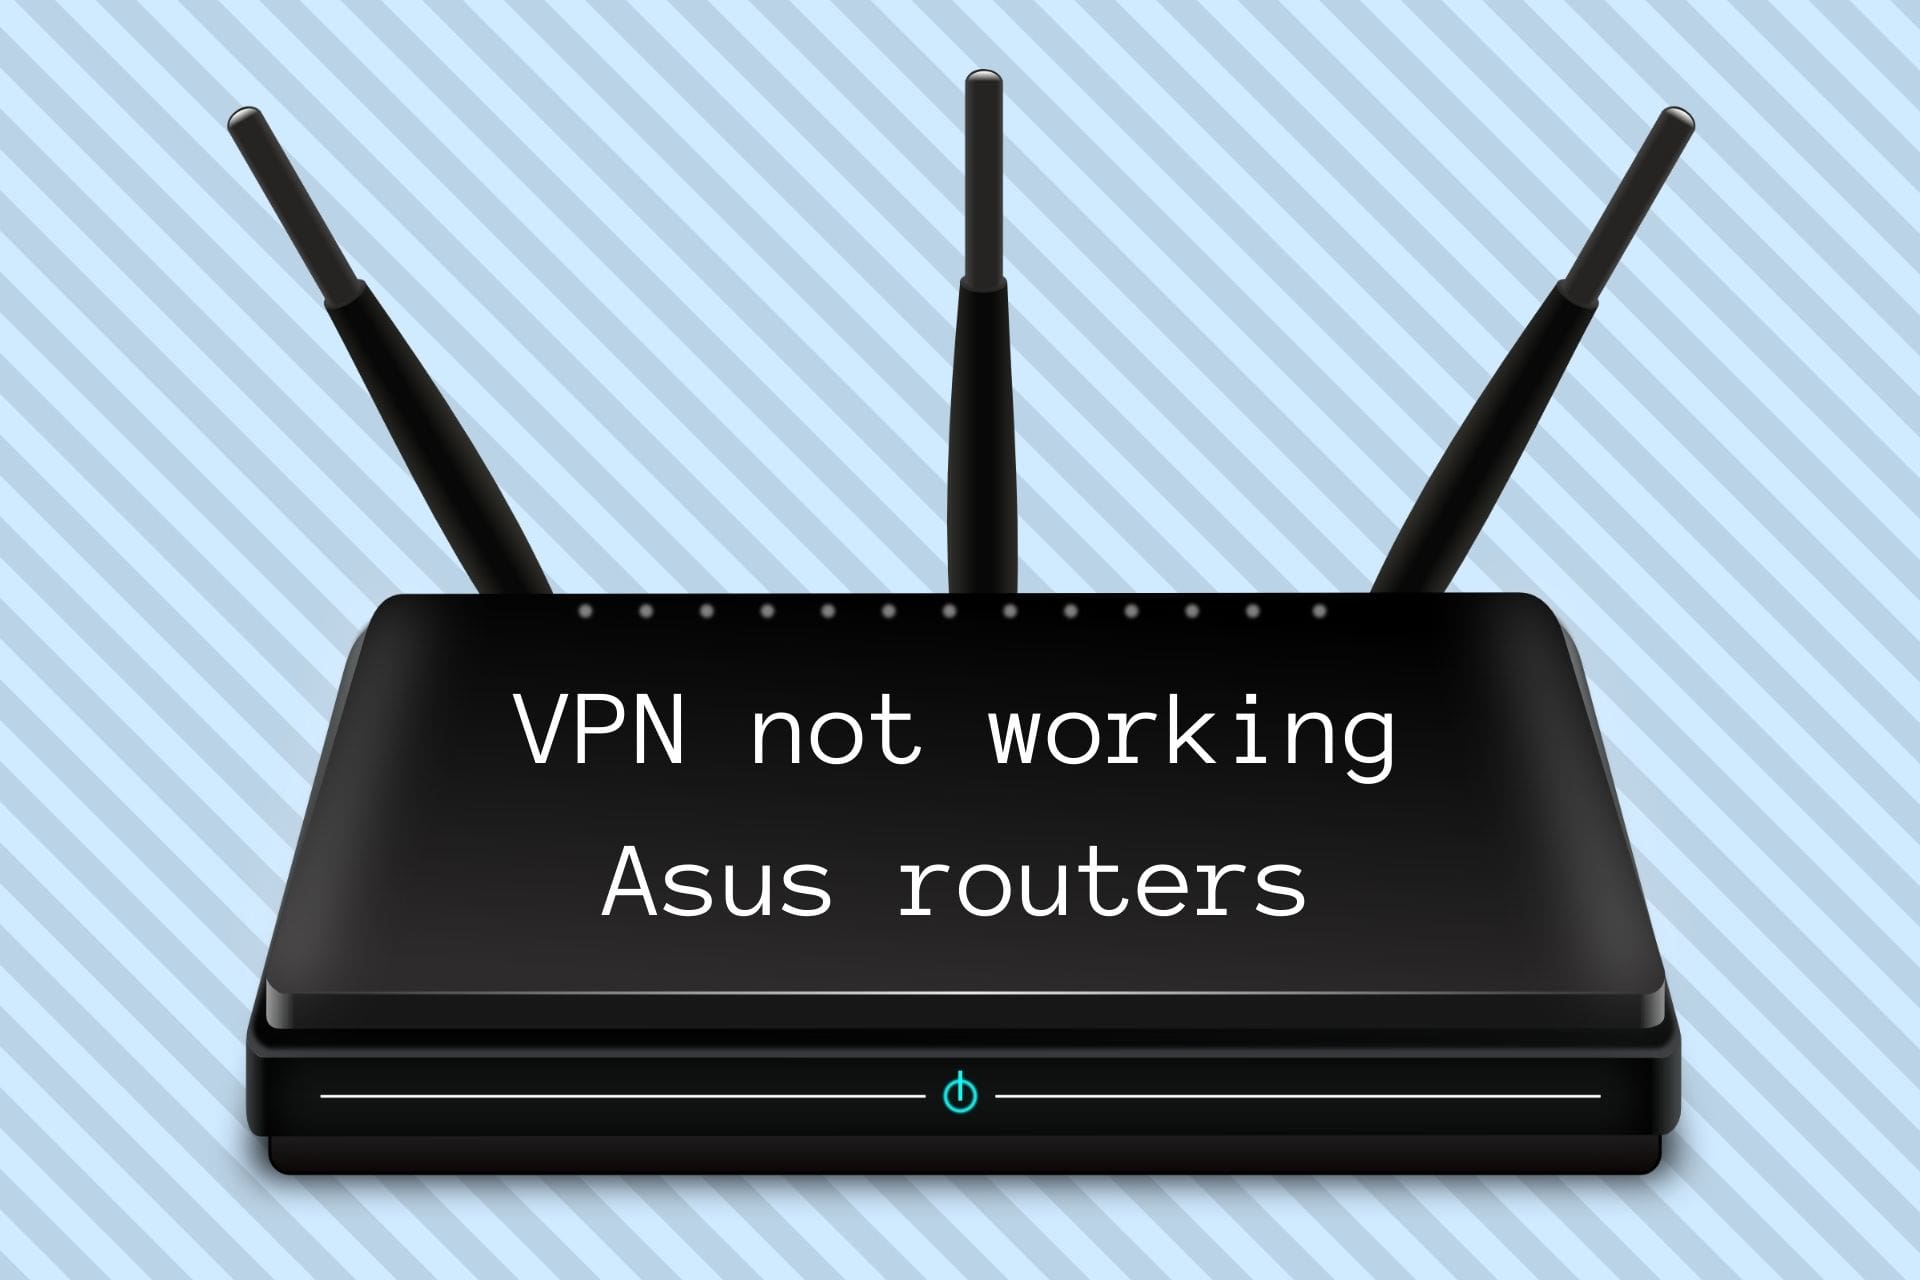 fix VPN not working with Asus routers